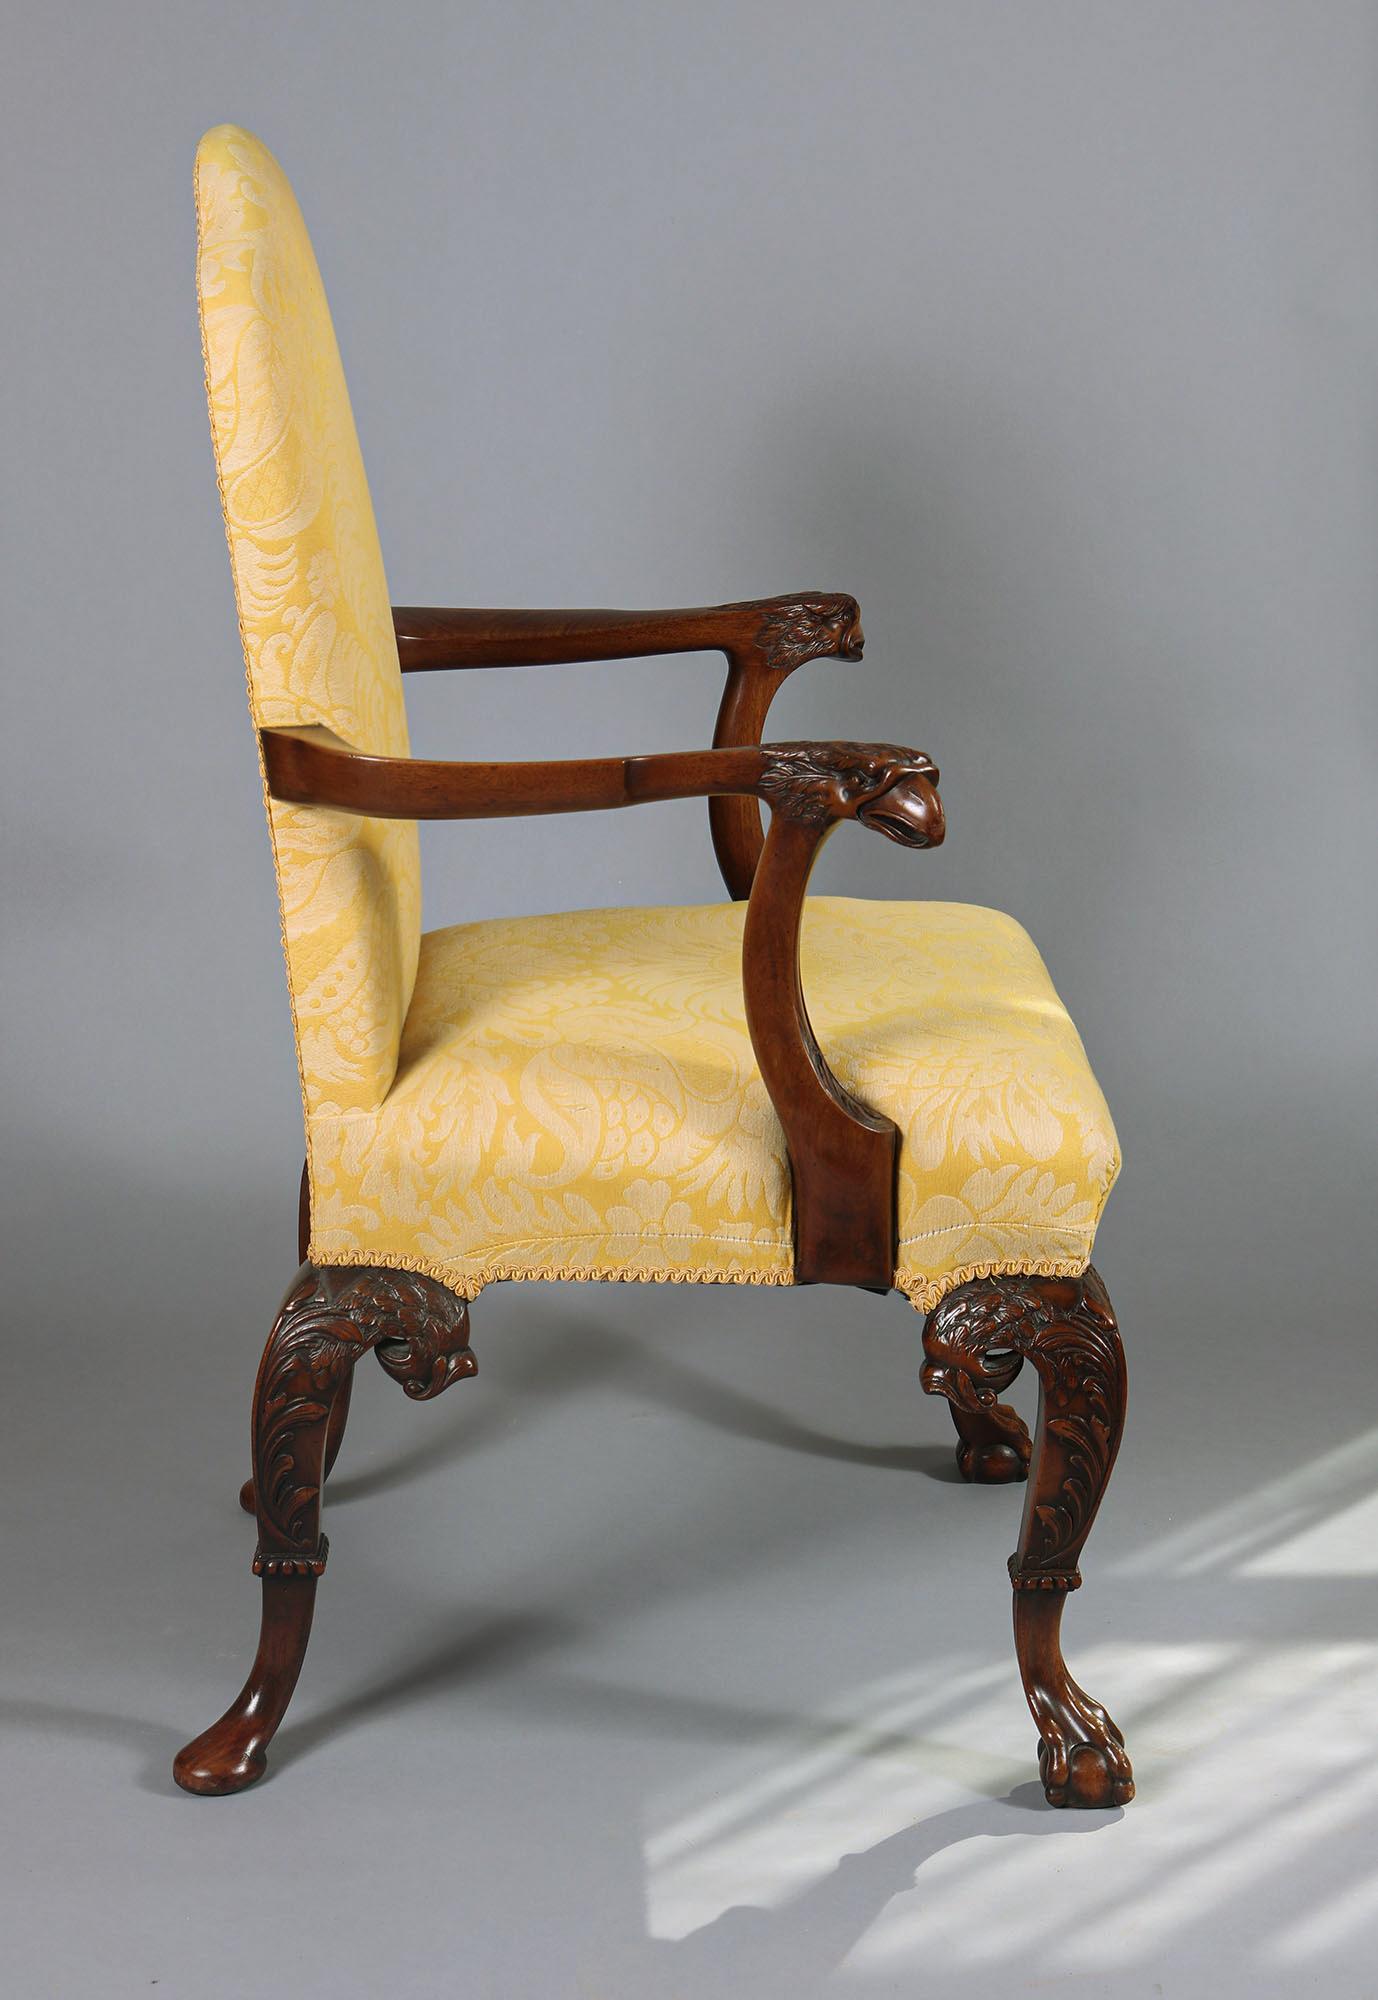 Mahogany Open Armchair, George I Style In Excellent Condition For Sale In Reepham, GB